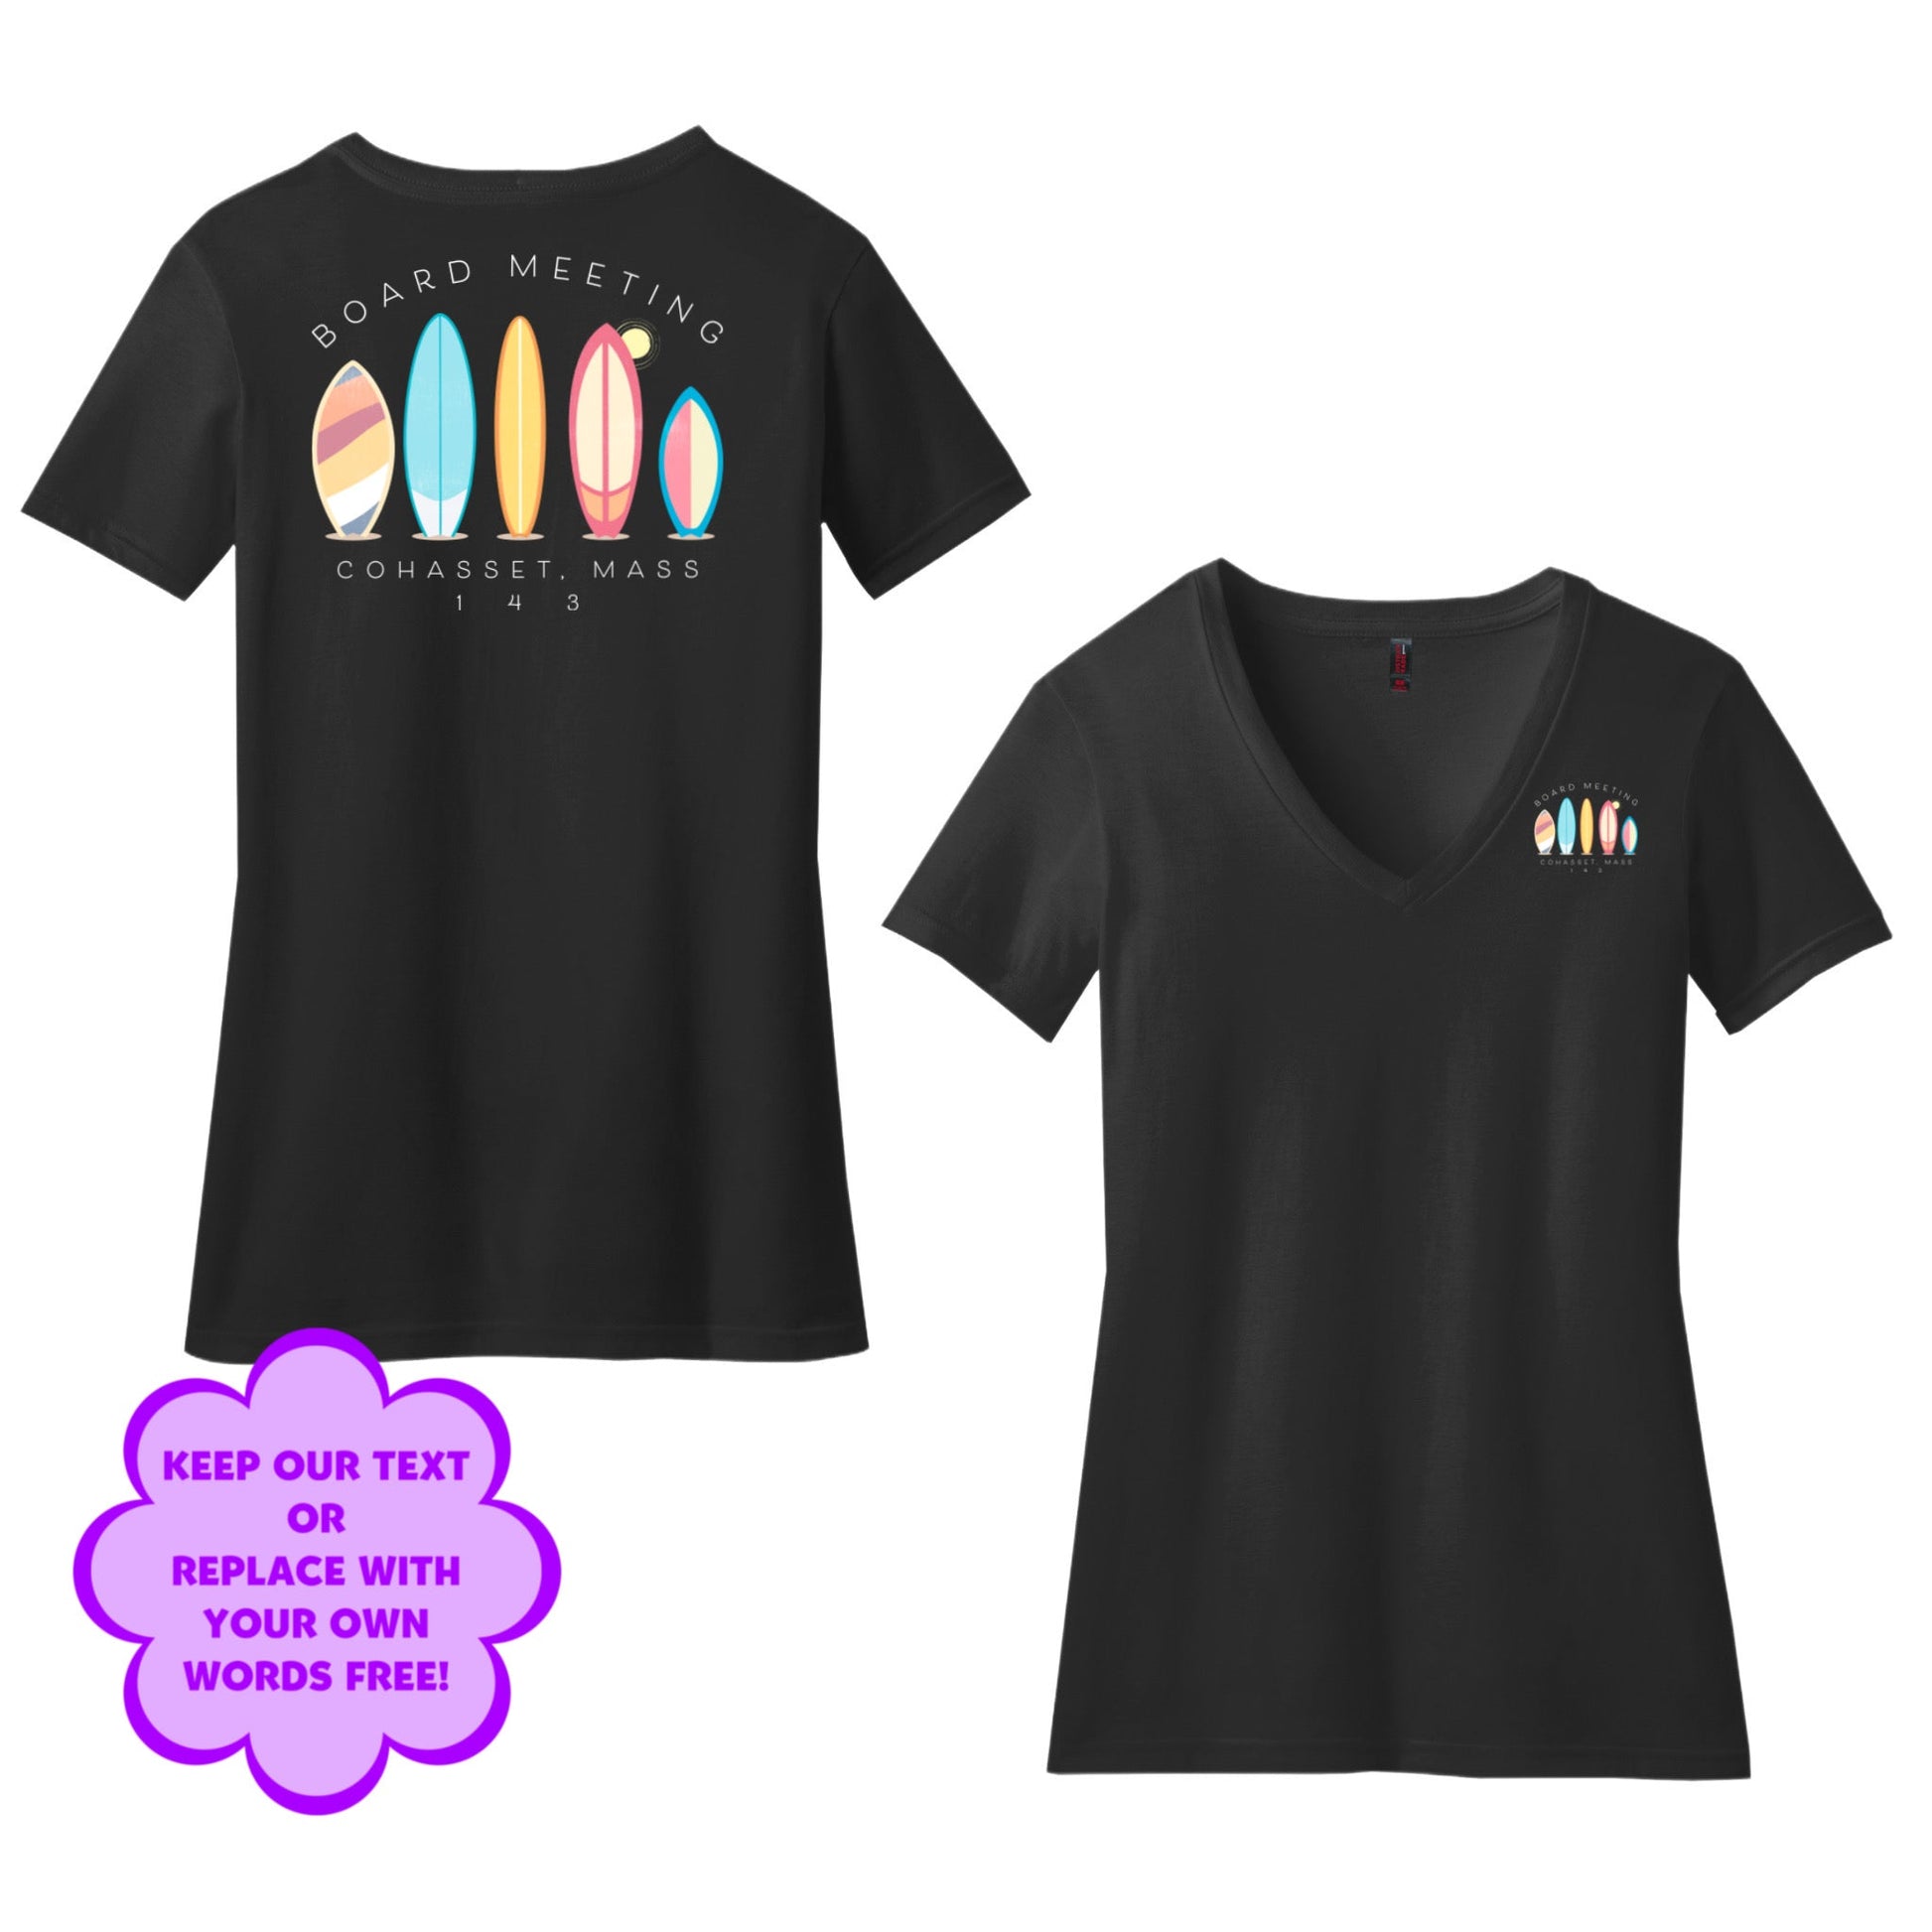 Personalize Free Surfboards, Cohasset, Women’s Cotton Tees from Baby Squid Ink 